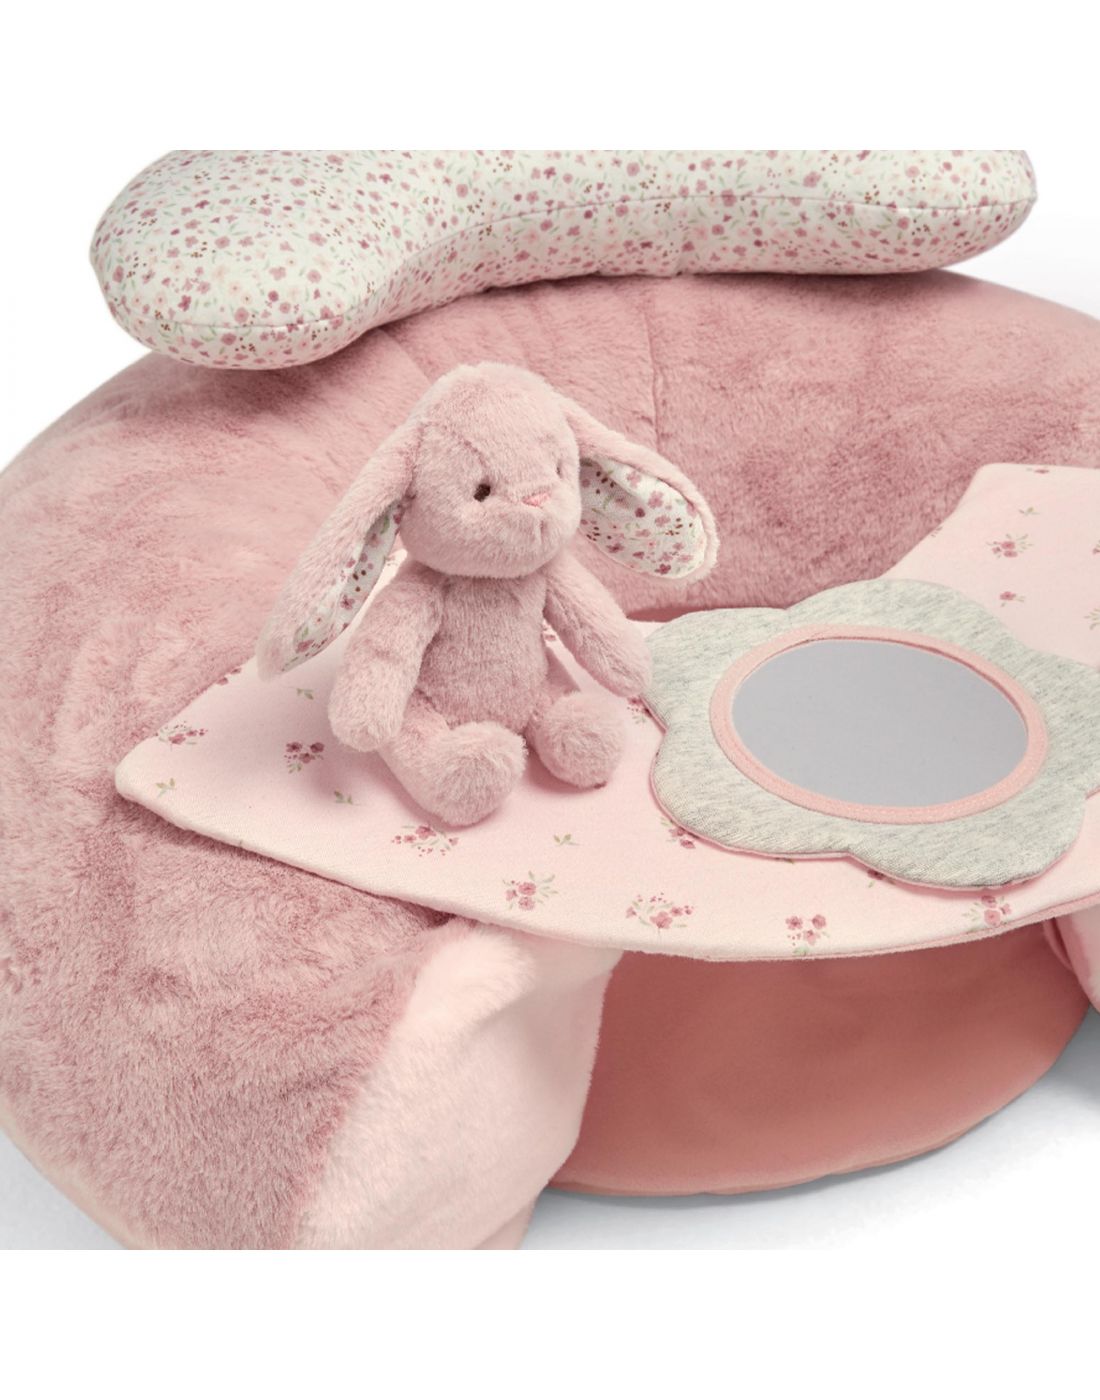 Mamas&Papas Welcome to the World Sit & Play Bunny Interactive Seat Pink